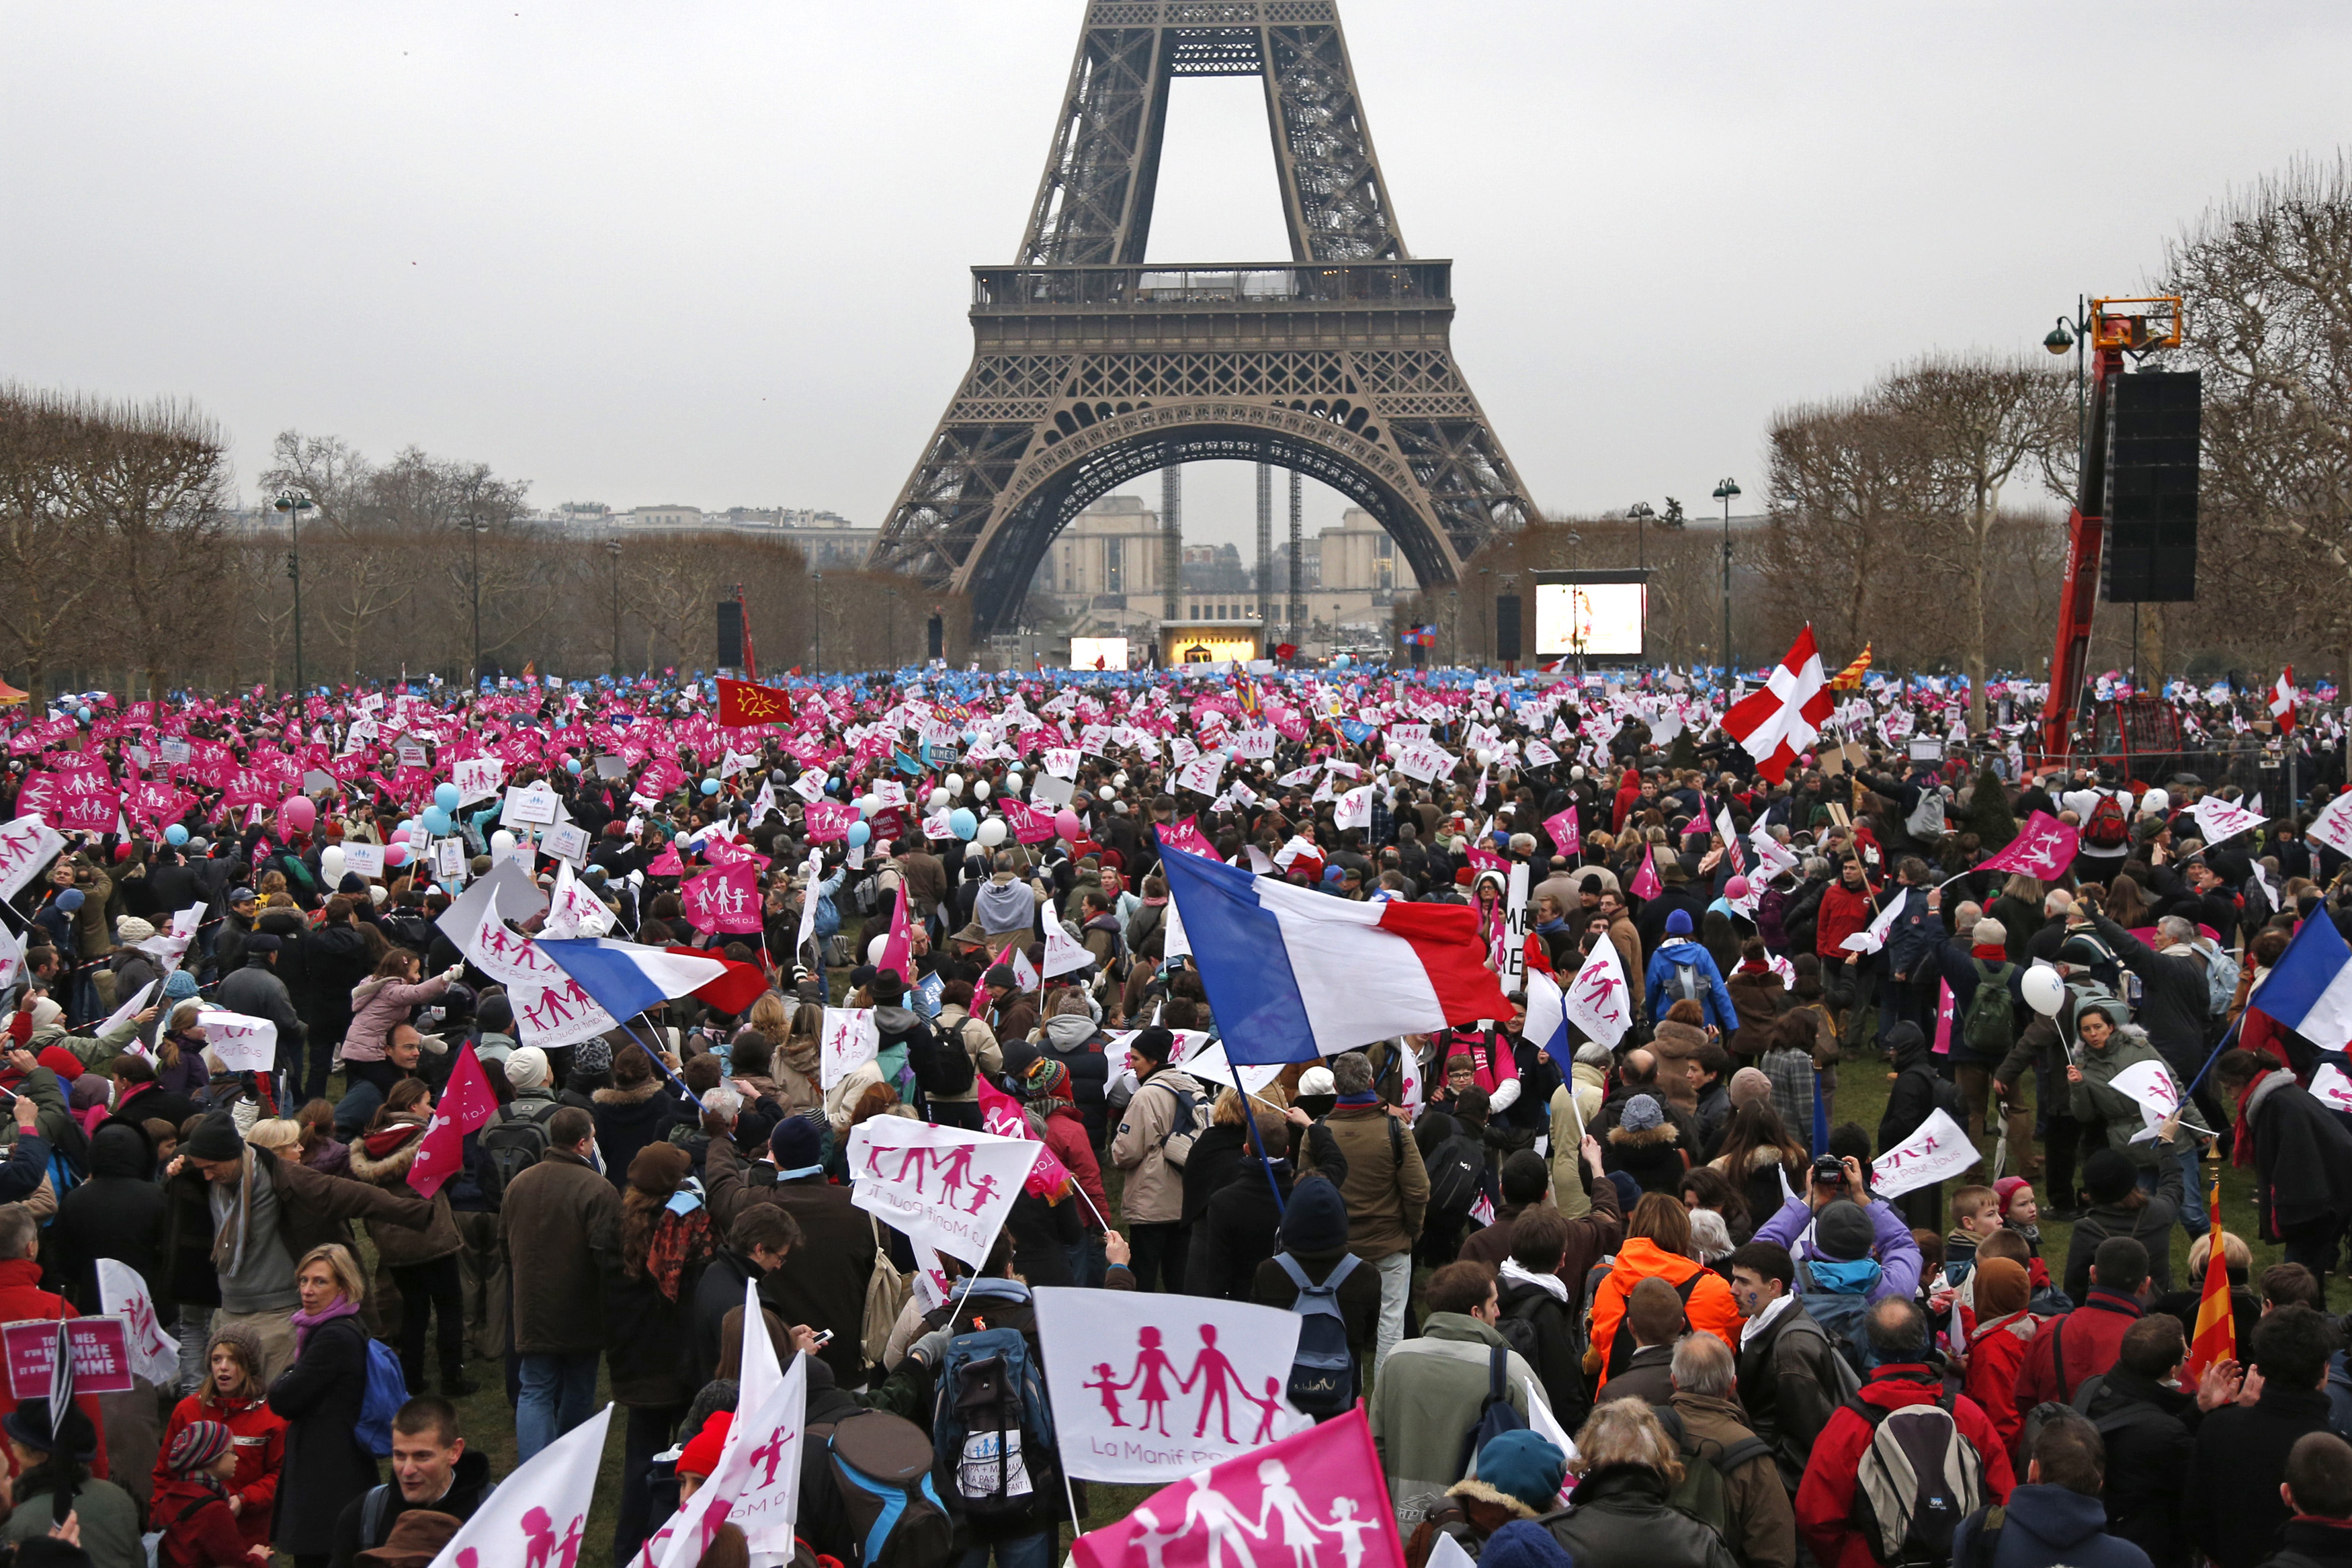 Thousands of demonstrators gather on the Champ de Mars near the Eiffel Tower in Paris, to protest France's planned legalisation of same-sex marriage, January 13, 2013 . REUTERS/Charles Platiau (FRANCE - Tags: POLITICS CIVIL UNREST)